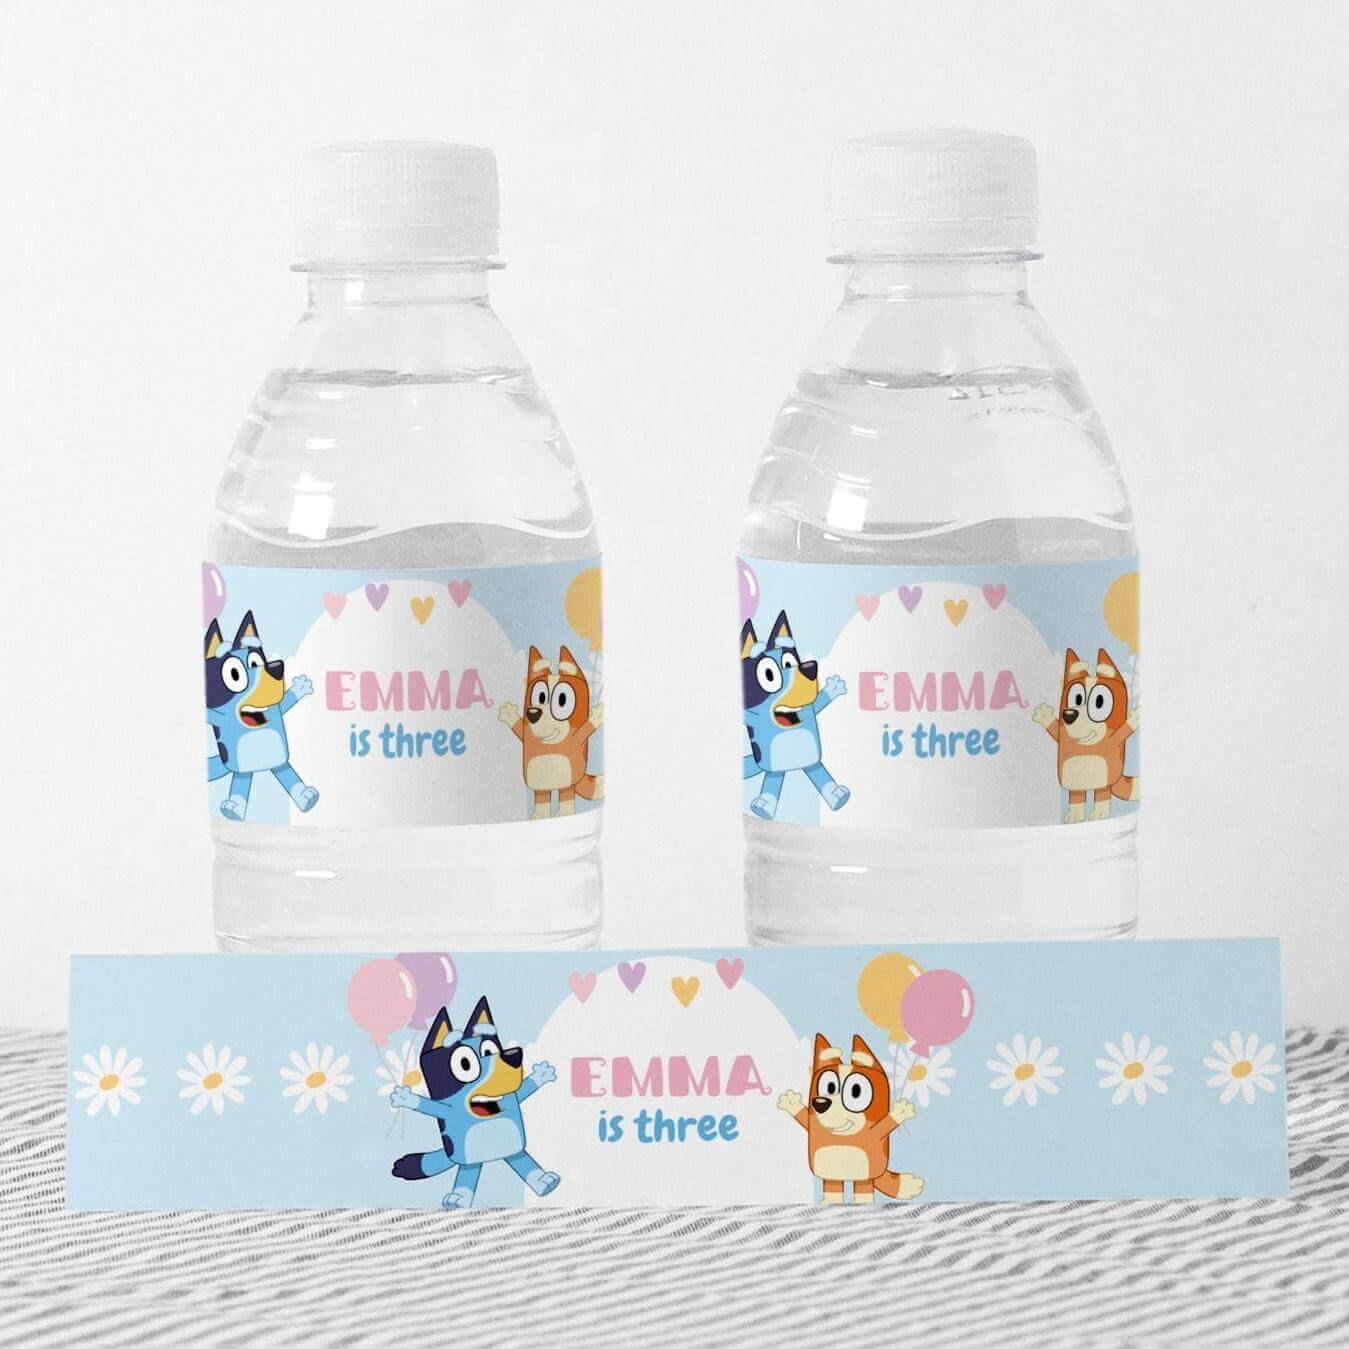 INSTANT DOWNLOAD Spiderman Party Water Bottle Label Printable